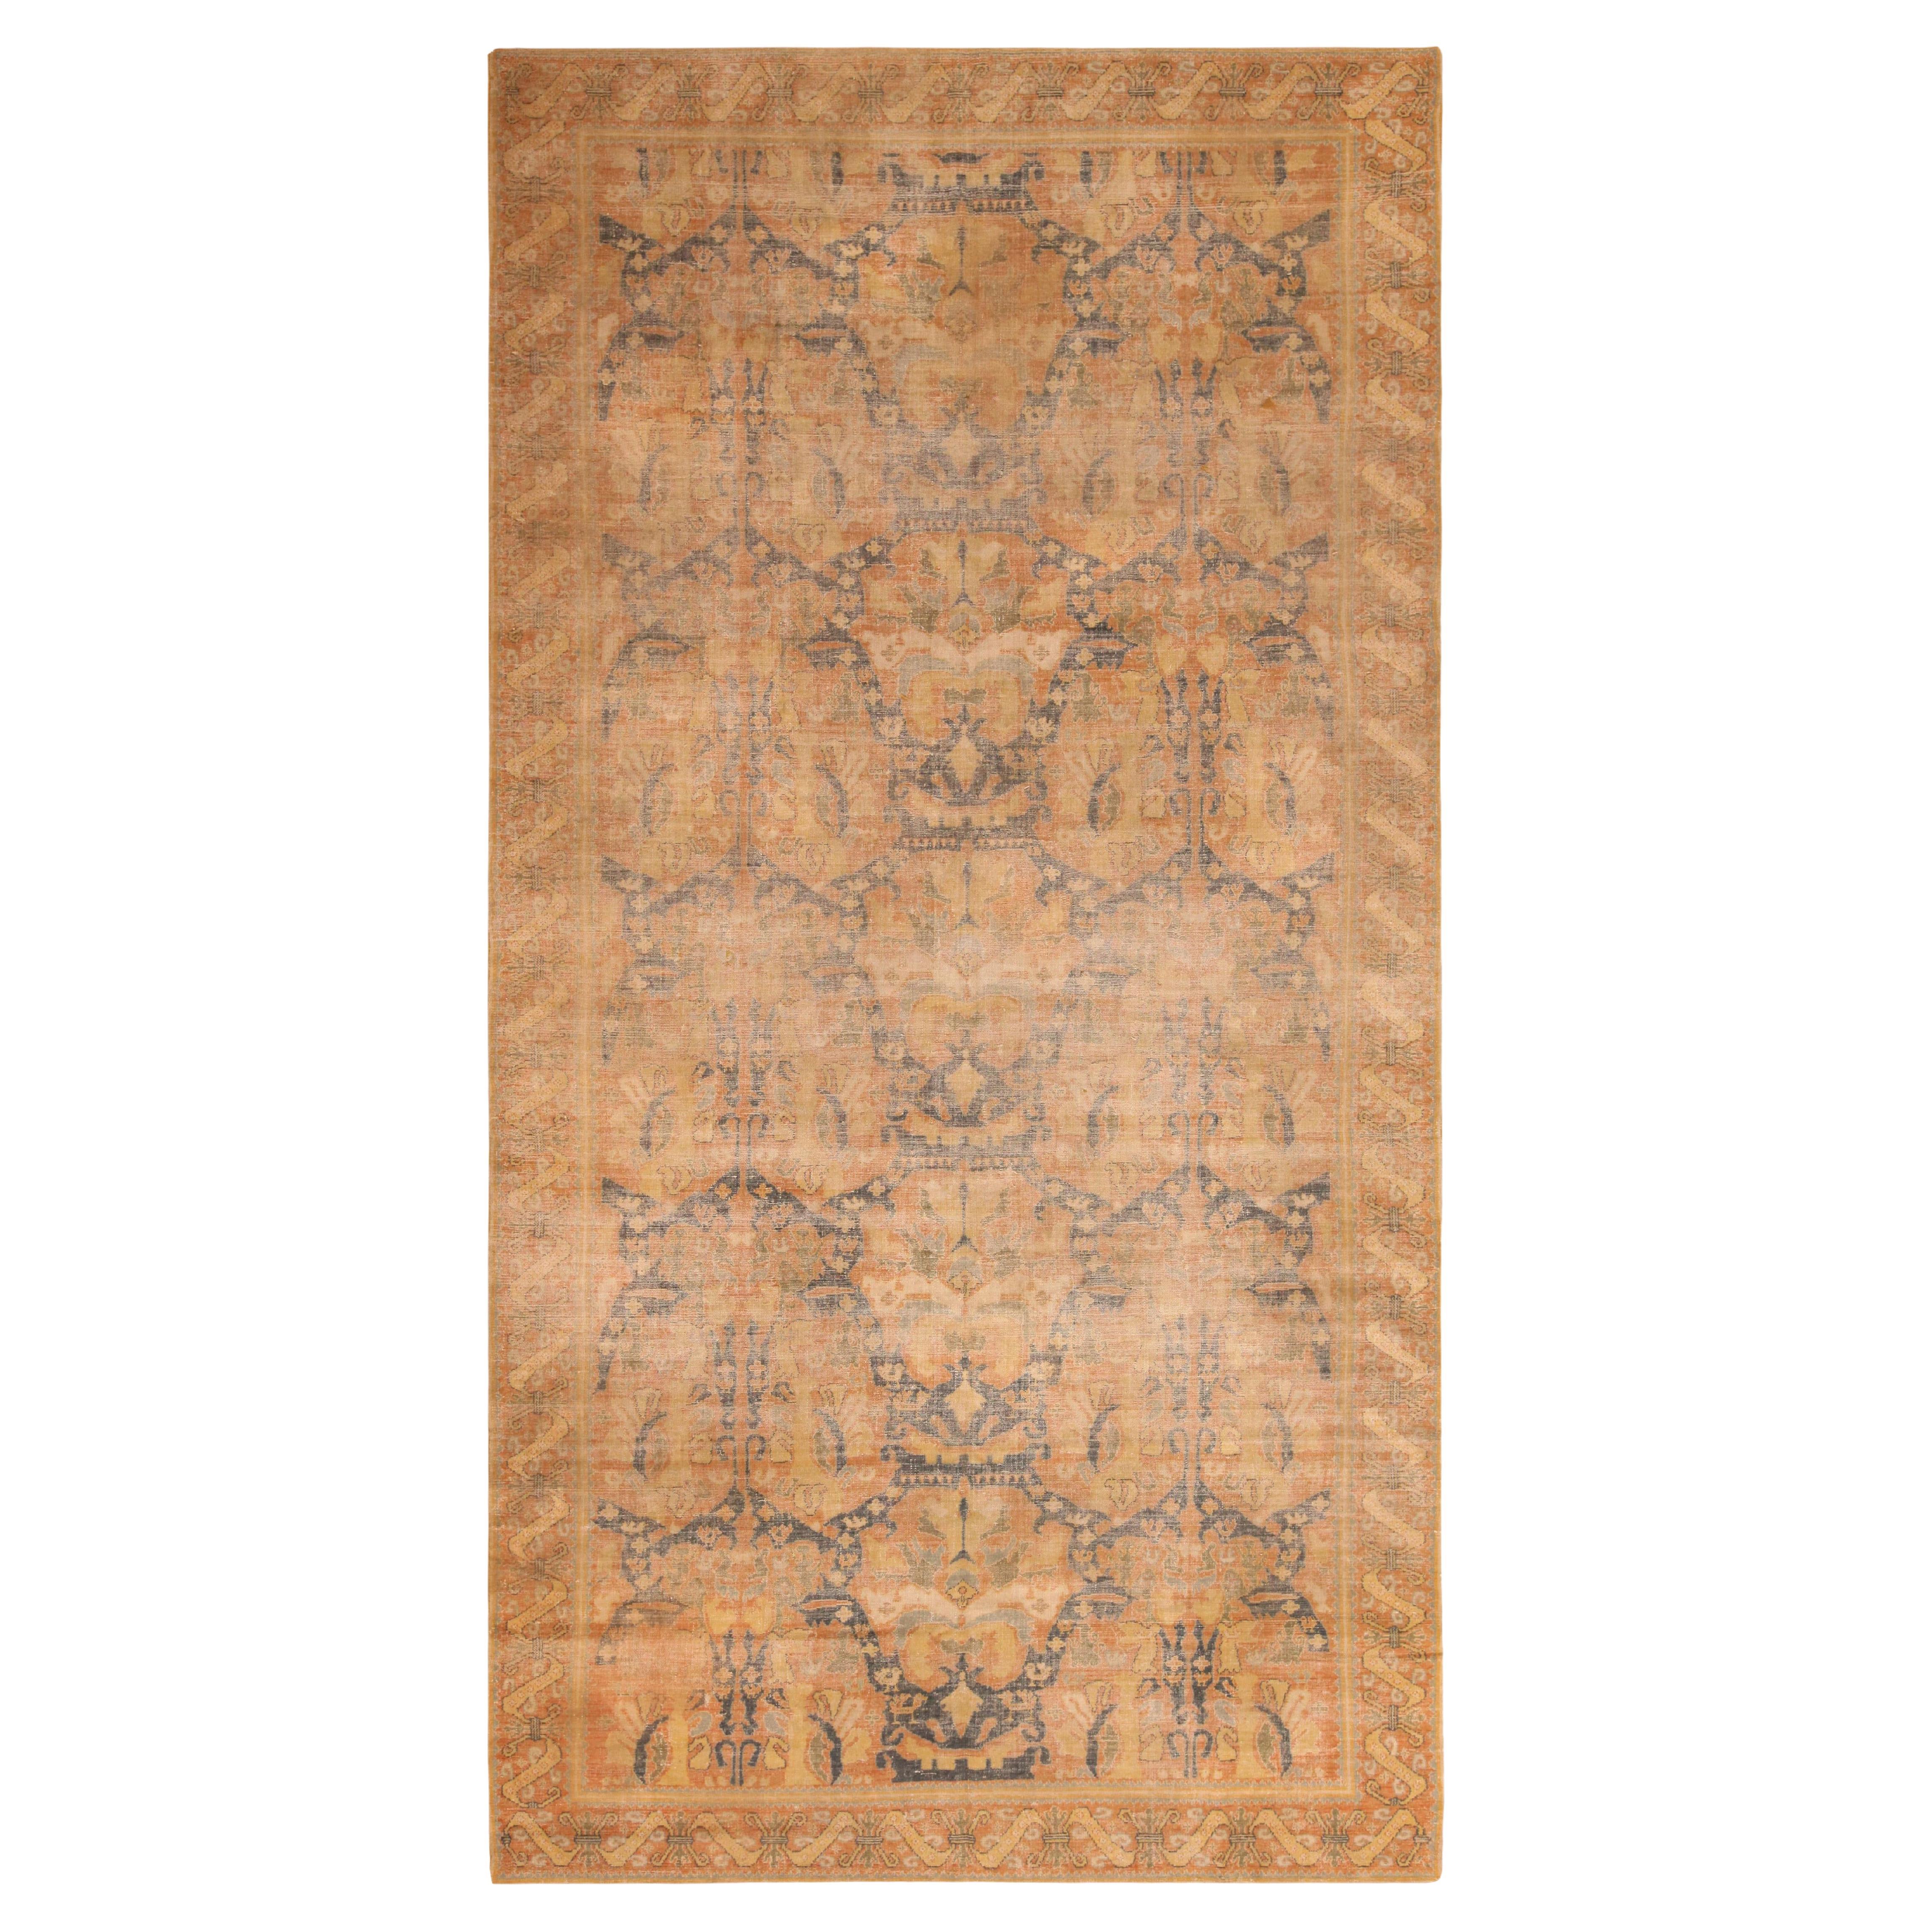 Nazmiyal Collection Antique Spanish Cuenca Style Rug. 7 ft 4 in x 14 ft 